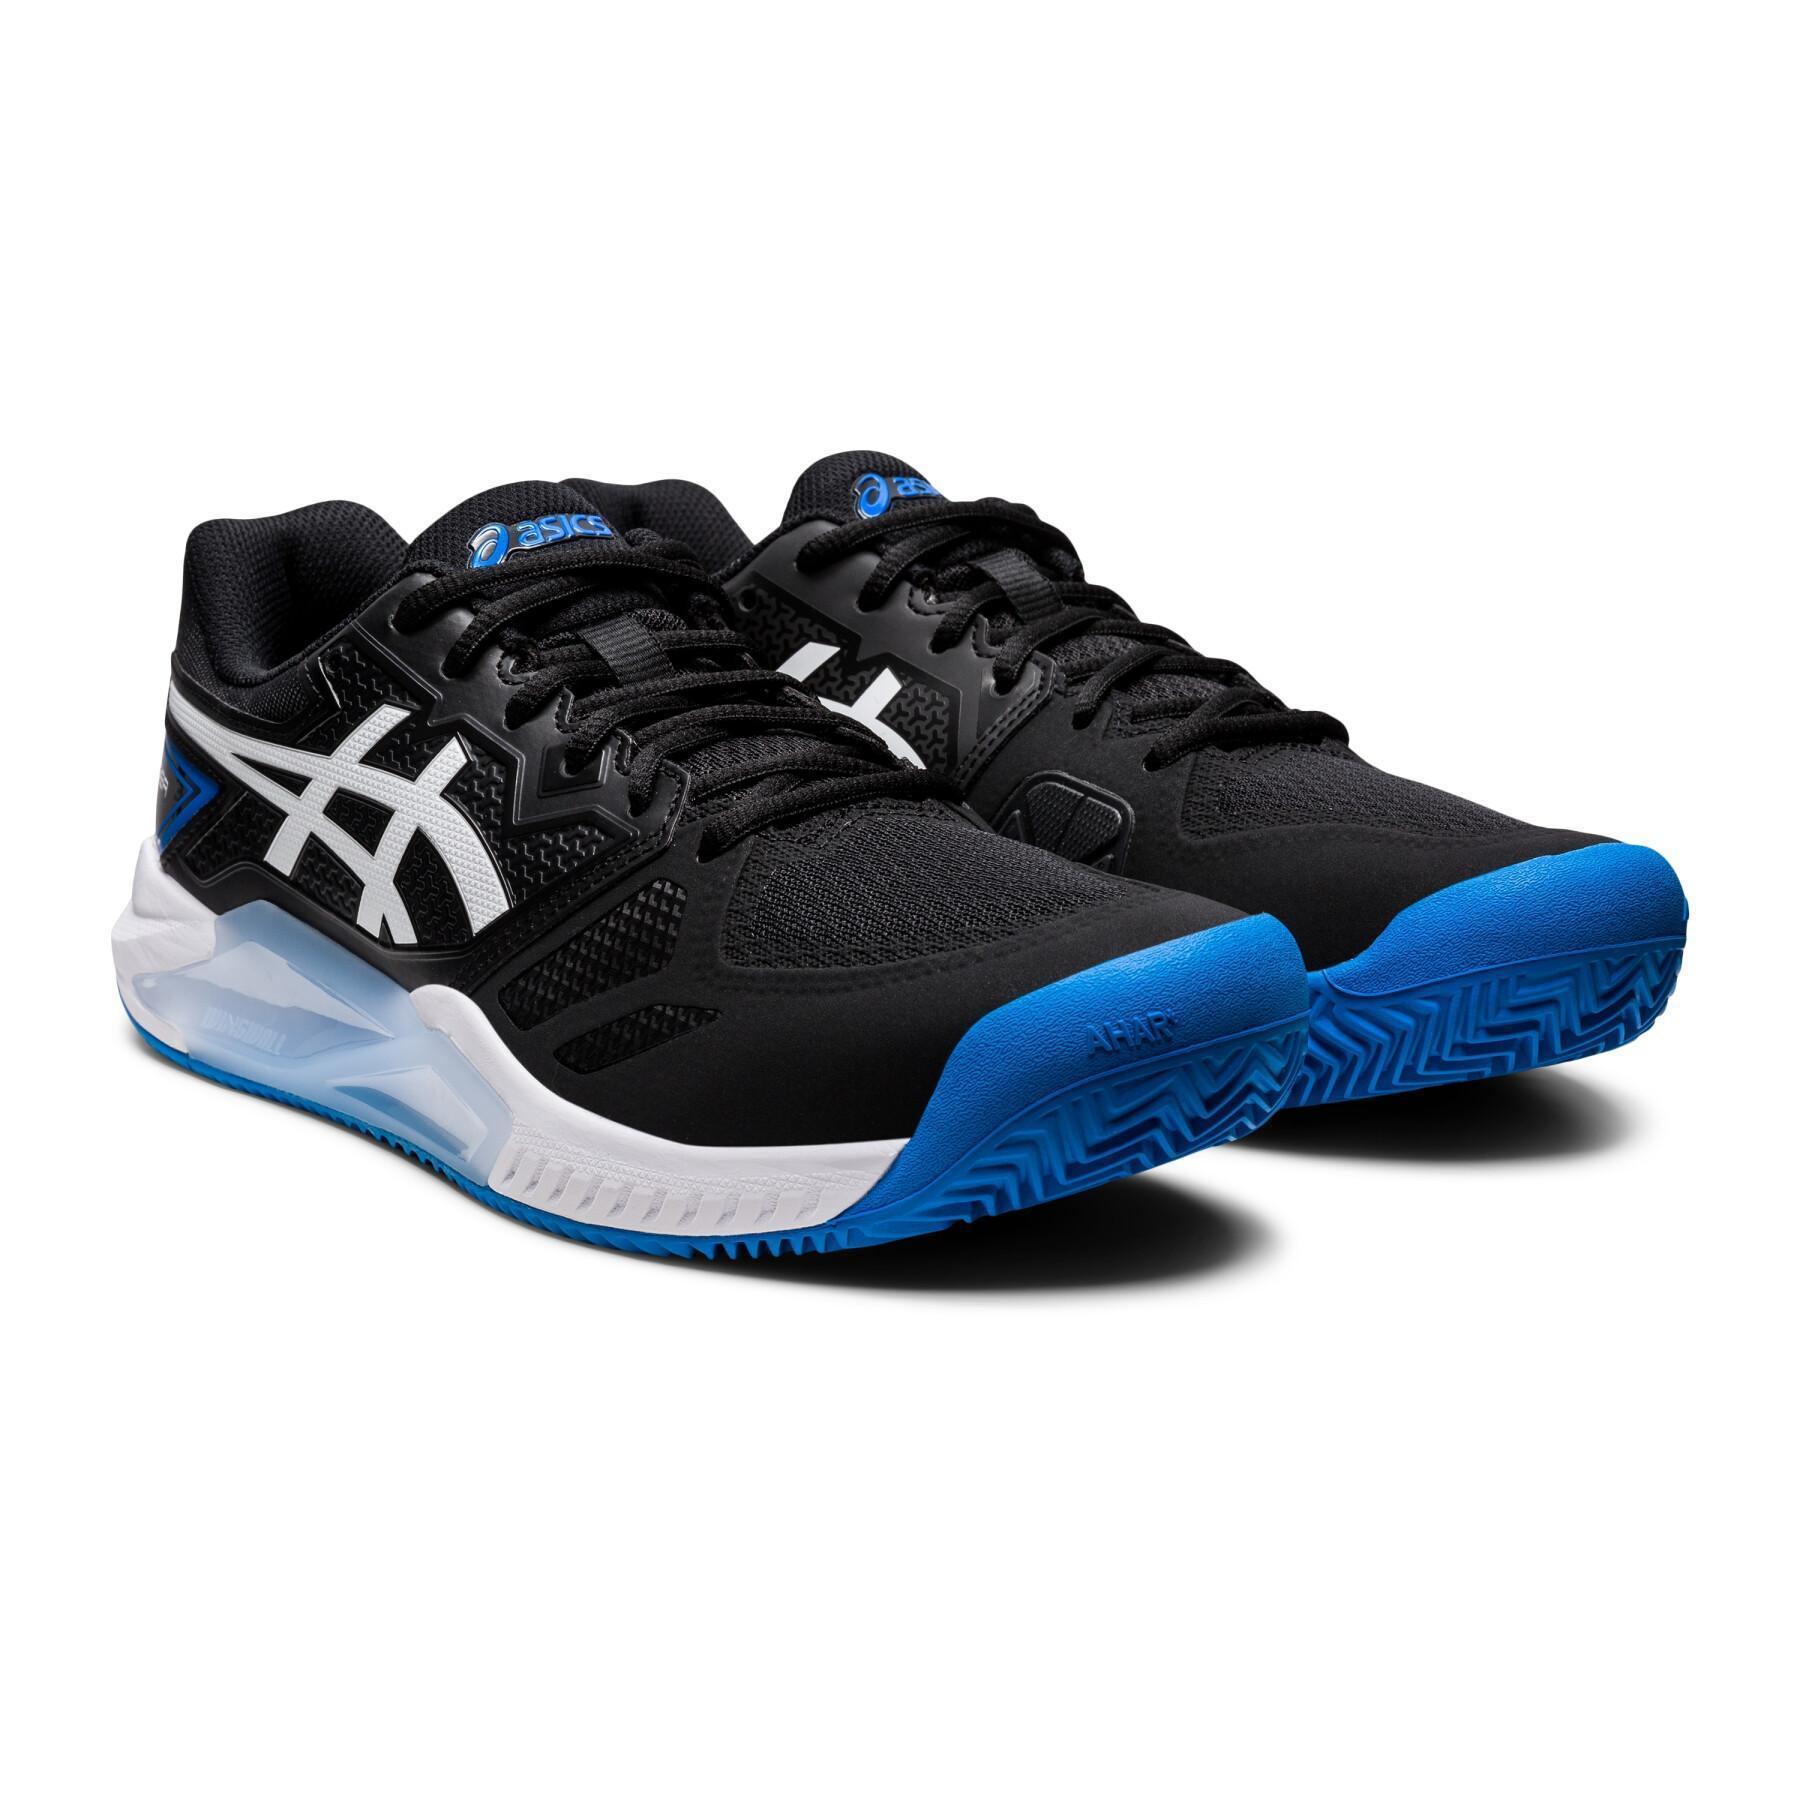 Tennis shoes Asics Gel-challenger 13 clay